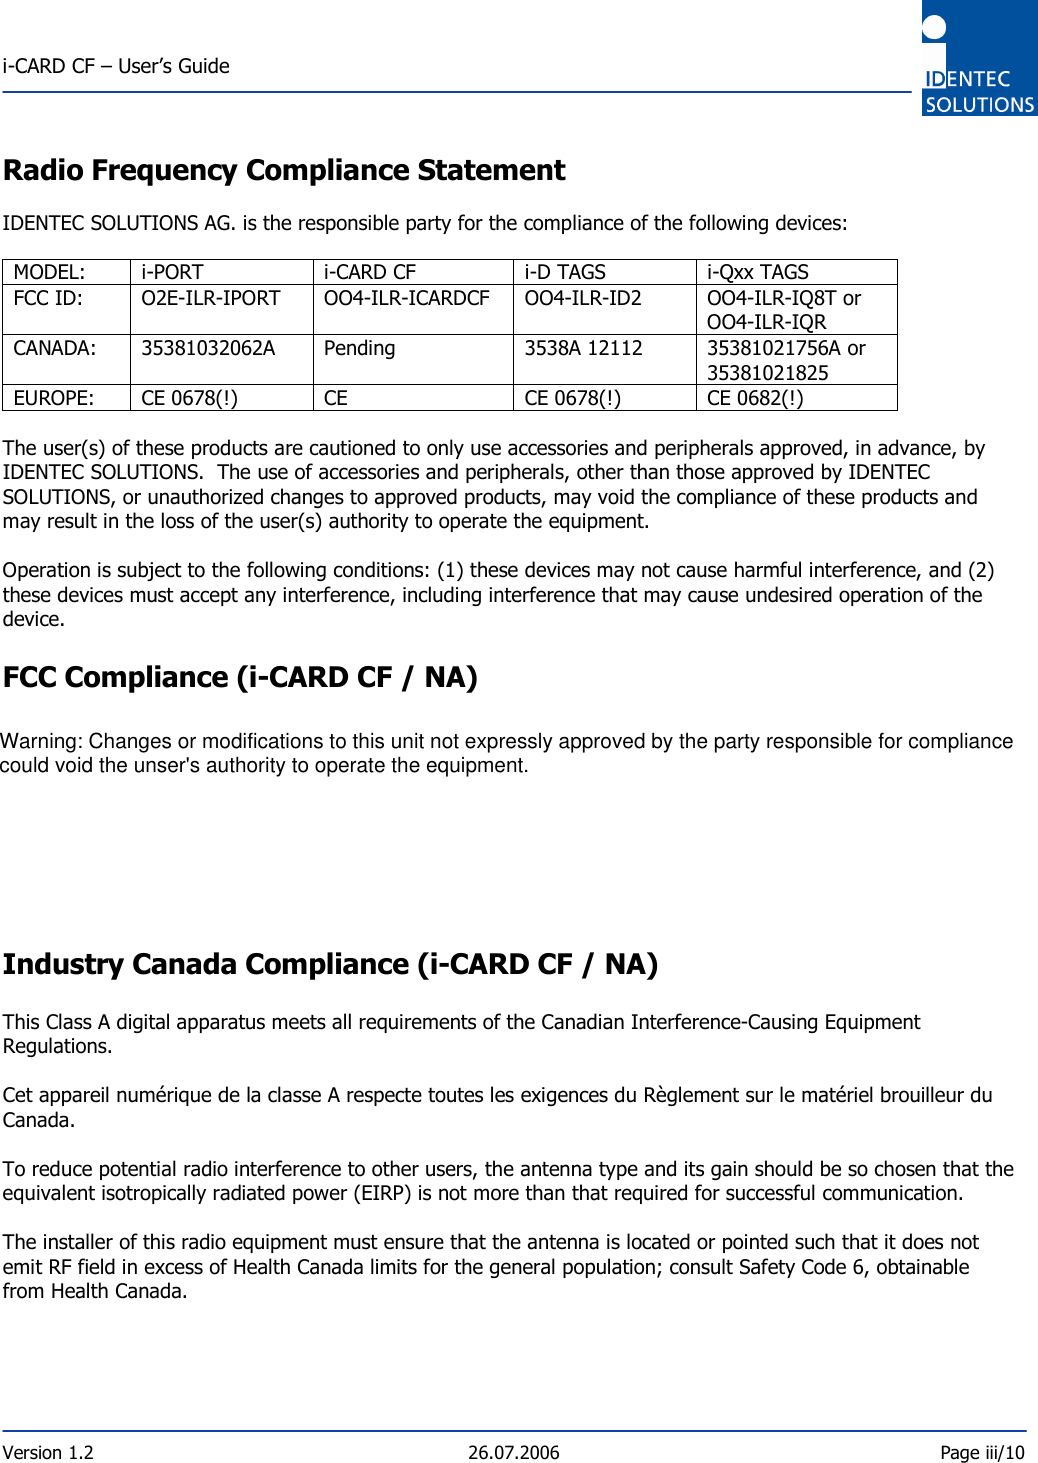  i-CARD CF – User’s Guide  Version 1.2  26.07.2006  Page iii/10     Radio Frequency Compliance Statement  IDENTEC SOLUTIONS AG. is the responsible party for the compliance of the following devices:  MODEL:  i-PORT  i-CARD CF  i-D TAGS  i-Qxx TAGS FCC ID:  O2E-ILR-IPORT  OO4-ILR-ICARDCF  OO4-ILR-ID2  OO4-ILR-IQ8T or OO4-ILR-IQR CANADA:  35381032062A  Pending  3538A 12112  35381021756A or  35381021825 EUROPE:  CE 0678(!)  CE  CE 0678(!)  CE 0682(!)  The user(s) of these products are cautioned to only use accessories and peripherals approved, in advance, by IDENTEC SOLUTIONS.  The use of accessories and peripherals, other than those approved by IDENTEC SOLUTIONS, or unauthorized changes to approved products, may void the compliance of these products and may result in the loss of the user(s) authority to operate the equipment.  Operation is subject to the following conditions: (1) these devices may not cause harmful interference, and (2) these devices must accept any interference, including interference that may cause undesired operation of the device.  FCC Compliance (i-CARD CF / NA)  This equipment has been tested and found to comply with the limits for a Class A digital device, pursuant to Part 15 of the FCC Rules. These limits are designed to provide reasonable protection against harmful interference when the equipment is operated in a commercial environment. This equipment generates, uses, and can radiate radio frequency energy and, if not installed and used in accordance with the instruction manual, may cause harmful interference to radio communication. Operation of this equipment in a residential area is likely to cause harmful interference in which case the user will be required to correct the interference at his/her own expense. Warning: Changes or modifications to this unit not expressly approved by the party responsible for compliance could void the user’s authority to operate the equipment.  Industry Canada Compliance (i-CARD CF / NA)  This Class A digital apparatus meets all requirements of the Canadian Interference-Causing Equipment Regulations.  Cet appareil numérique de la classe A respecte toutes les exigences du Règlement sur le matériel brouilleur du Canada.  To reduce potential radio interference to other users, the antenna type and its gain should be so chosen that the equivalent isotropically radiated power (EIRP) is not more than that required for successful communication.  The installer of this radio equipment must ensure that the antenna is located or pointed such that it does not emit RF field in excess of Health Canada limits for the general population; consult Safety Code 6, obtainable from Health Canada.     Warning: Changes or modifications to this unit not expressly approved by the party responsible for compliance could void the unser&apos;s authority to operate the equipment.